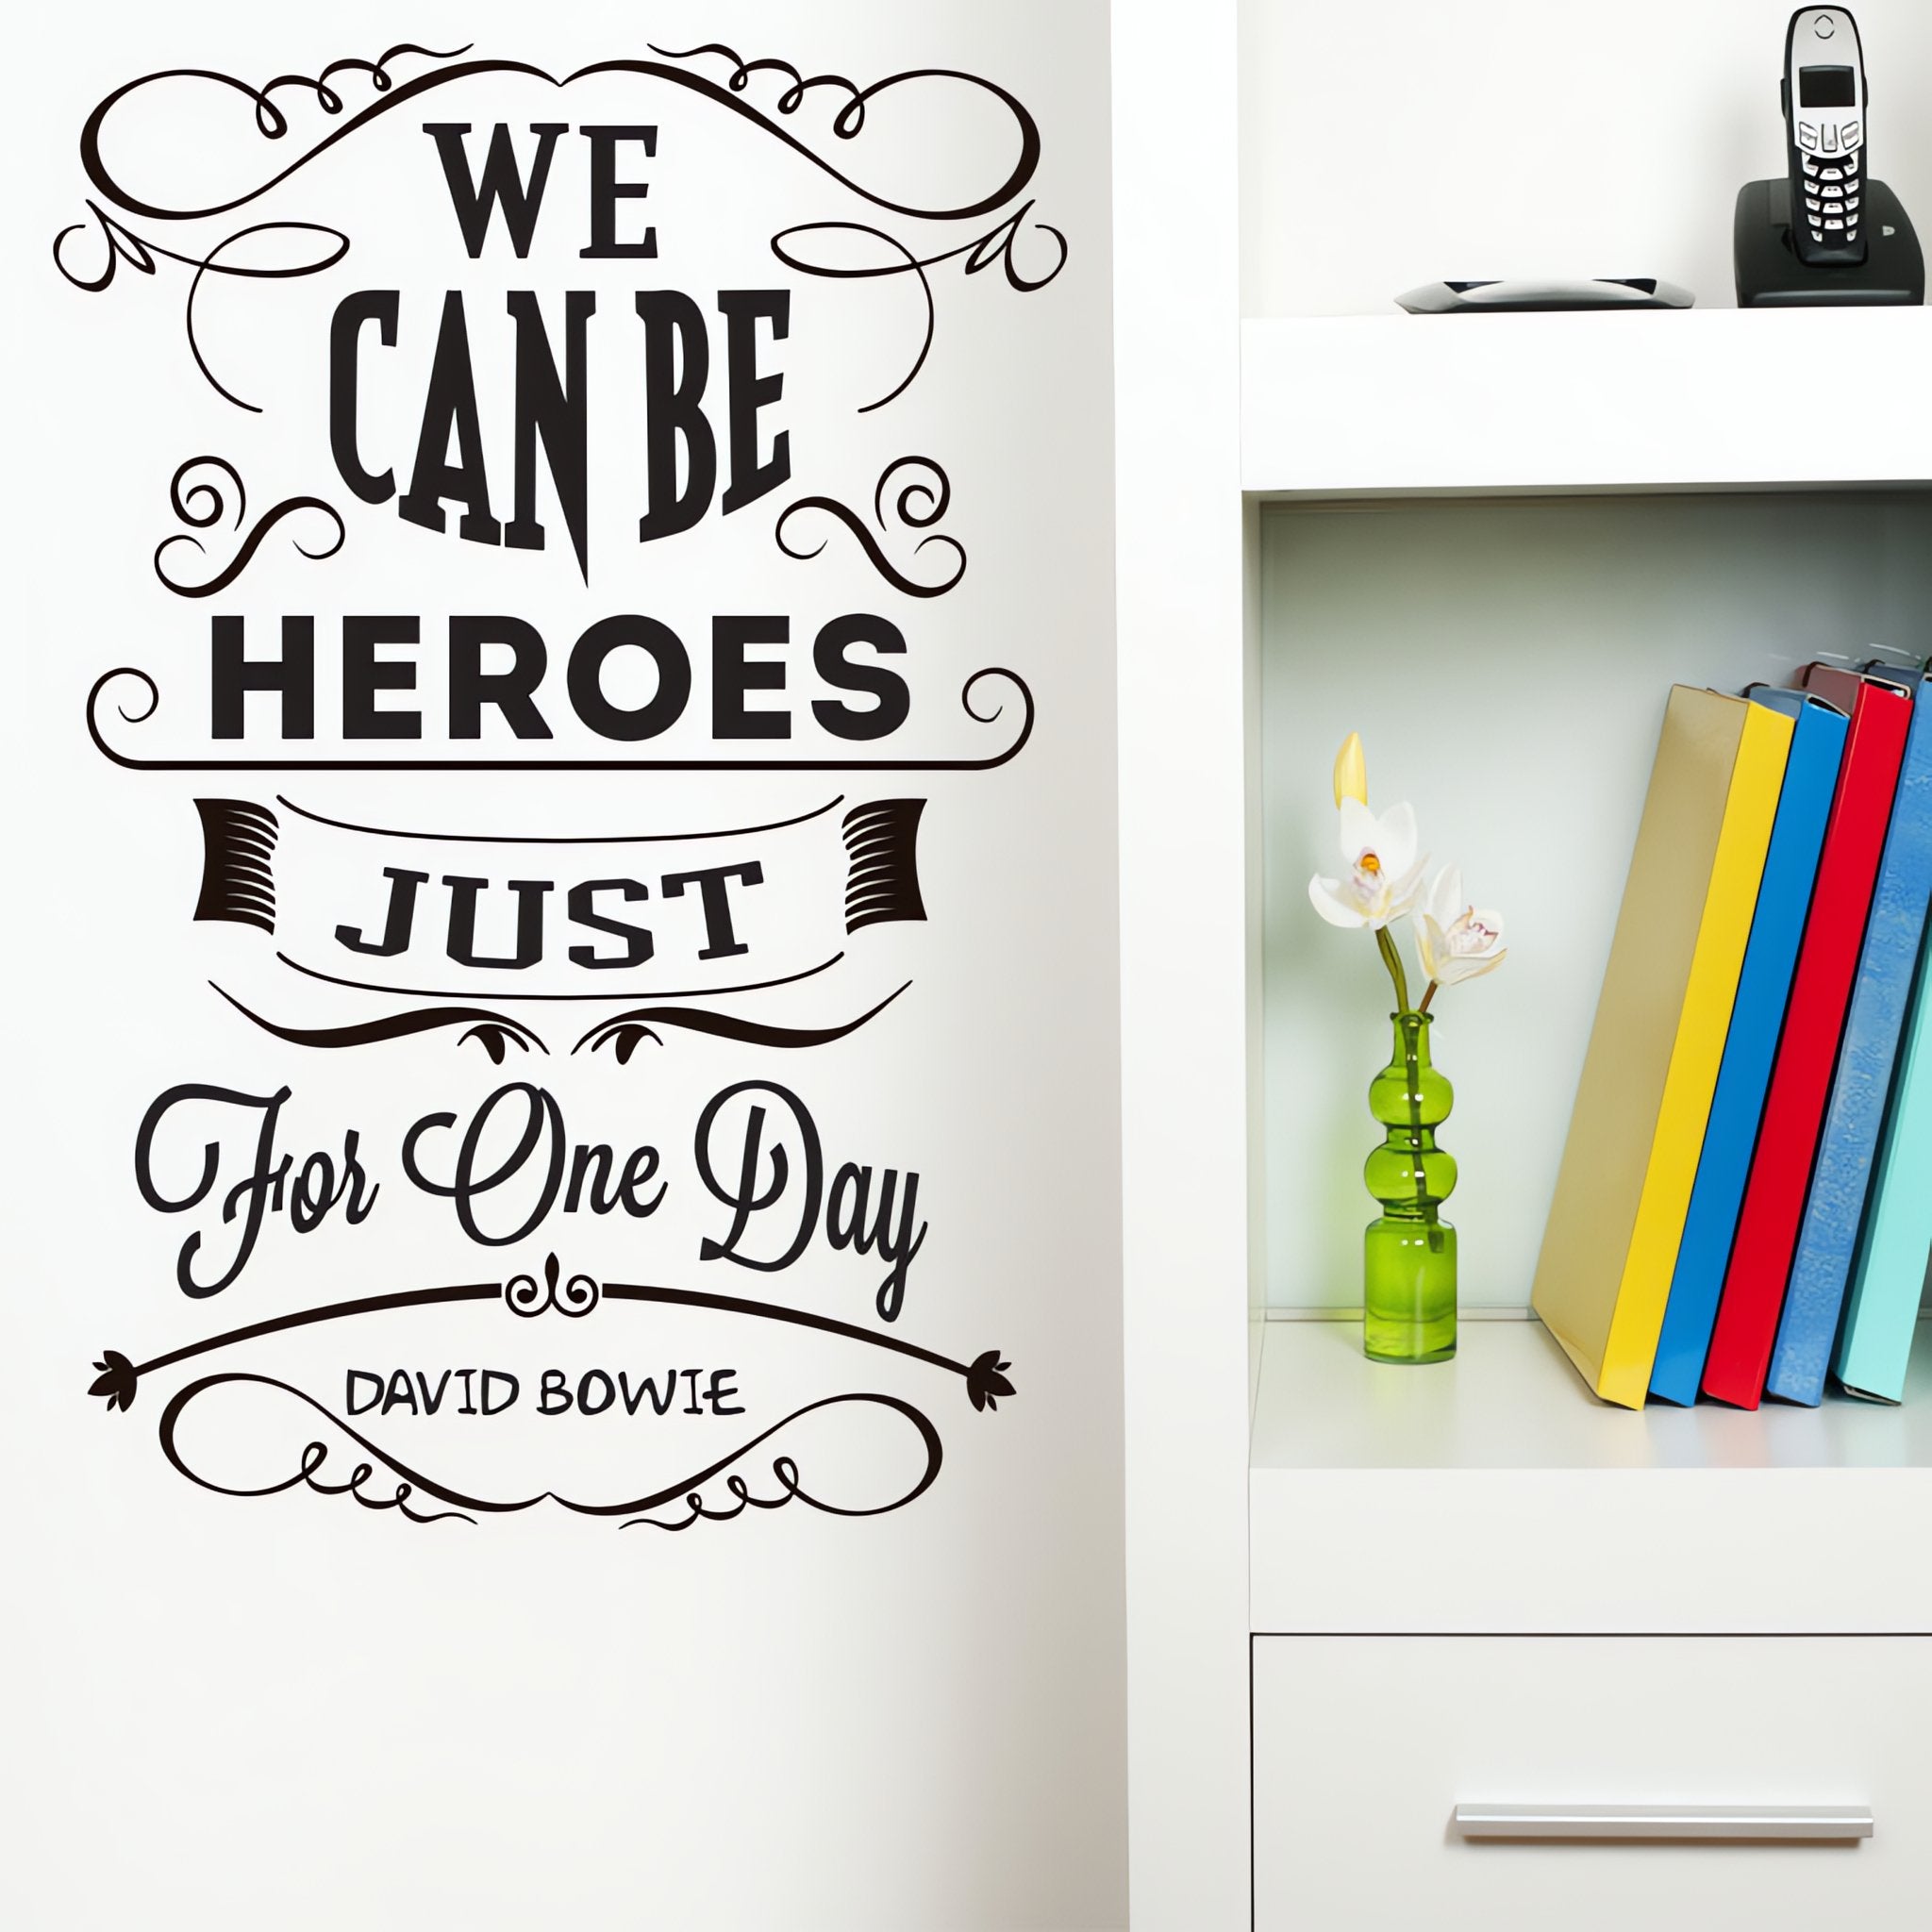 Wall quote sticker with text "We Can Be Heroes Just For One Day" by David Bowie next to a shelf.